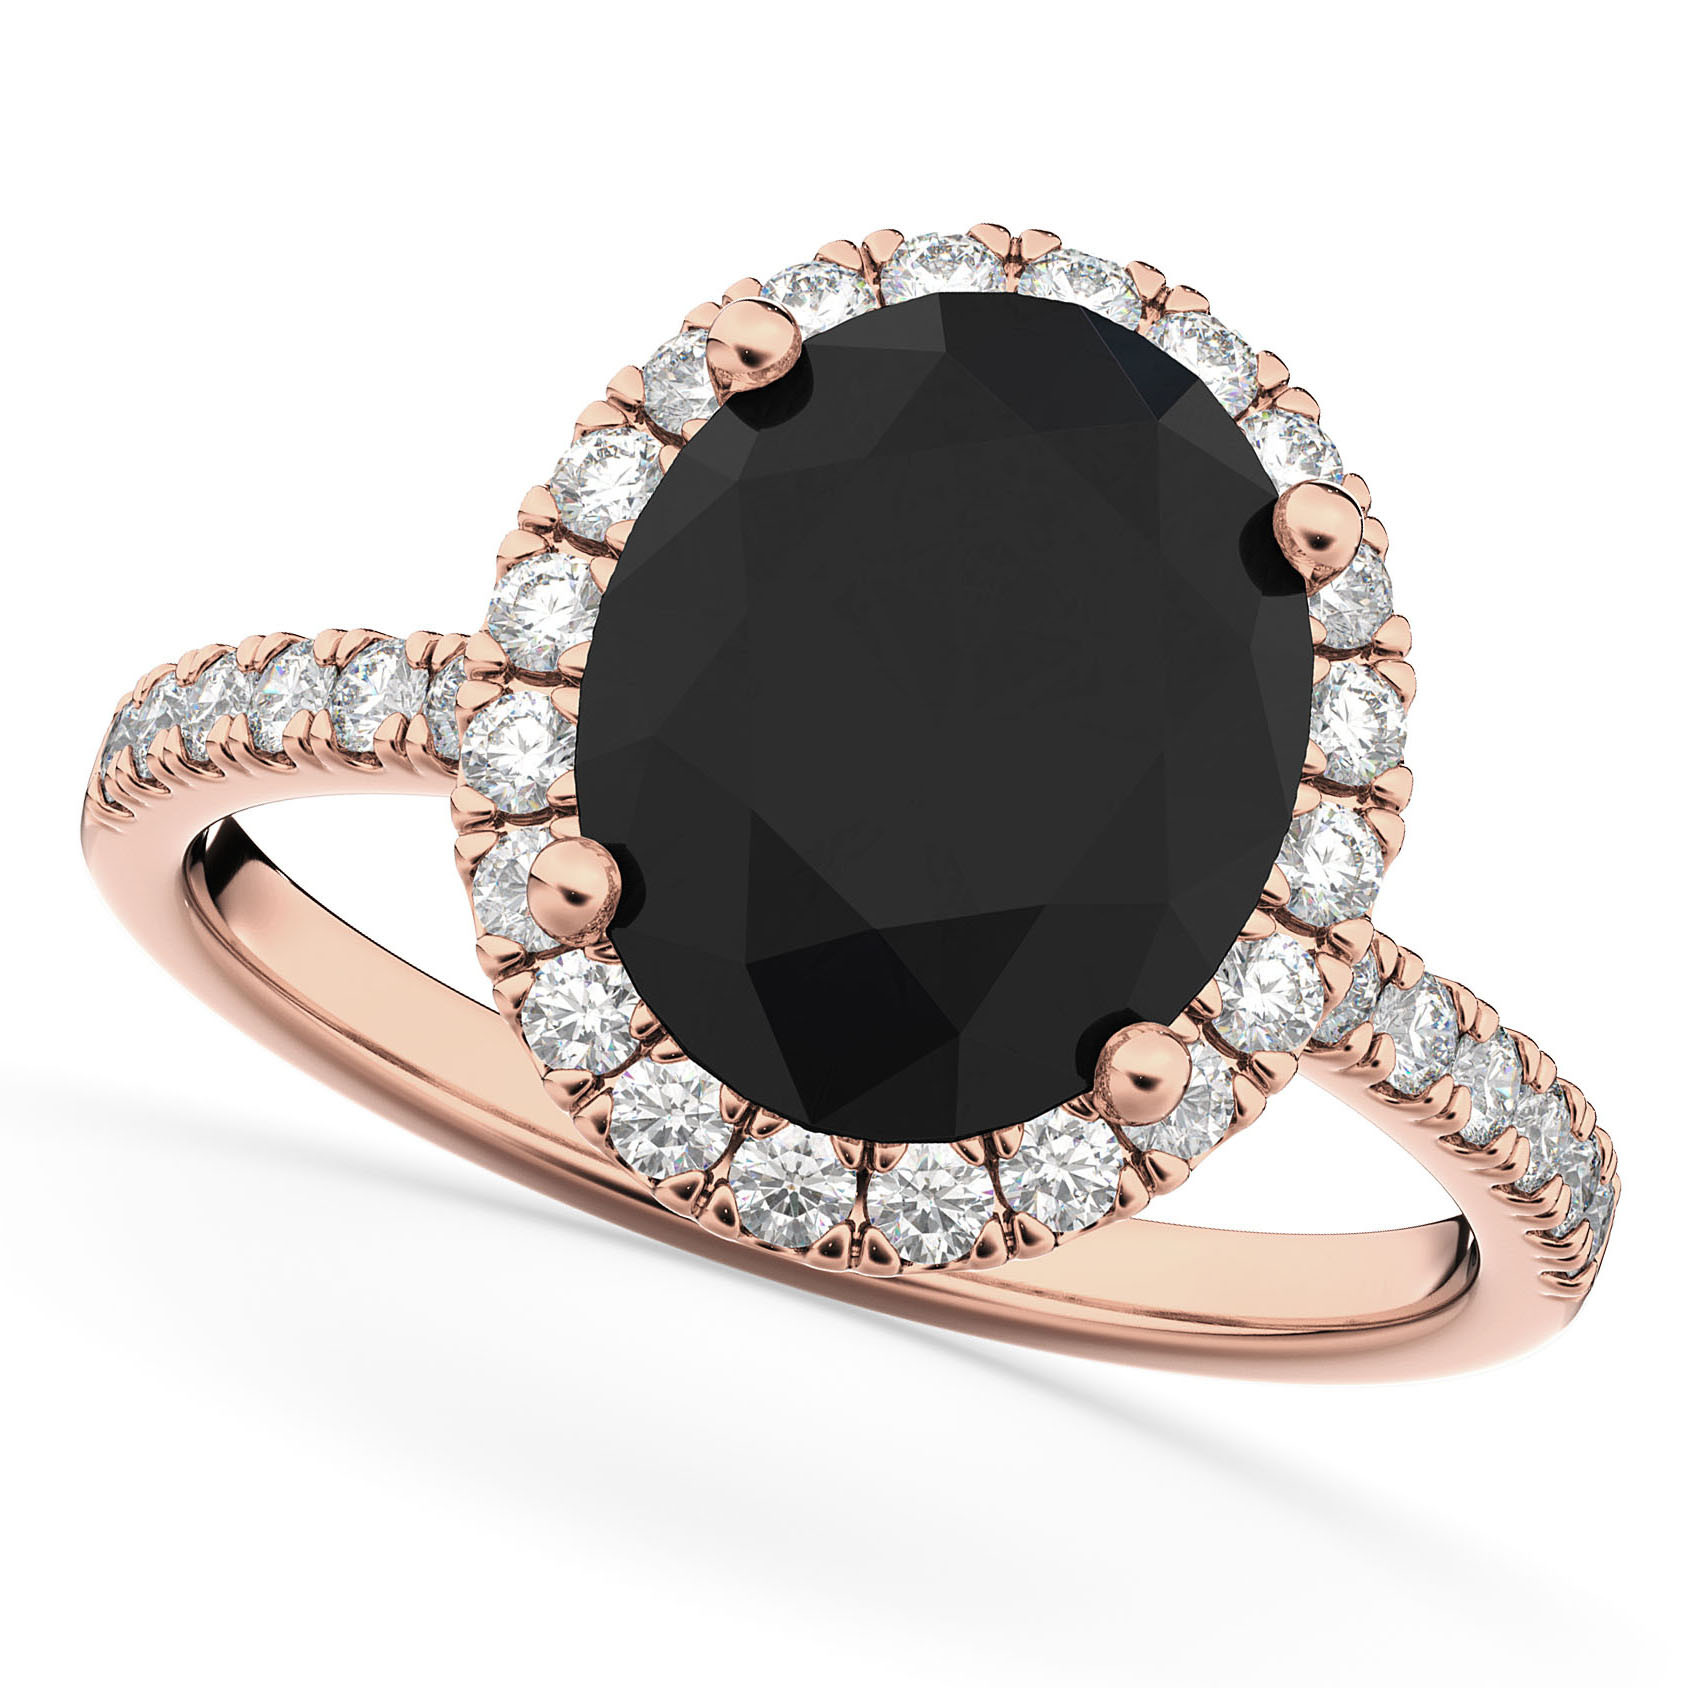 Black Diamond And Rose Gold Engagement Rings
 Oval Black Diamond & Diamond Engagement Ring 14K Rose Gold